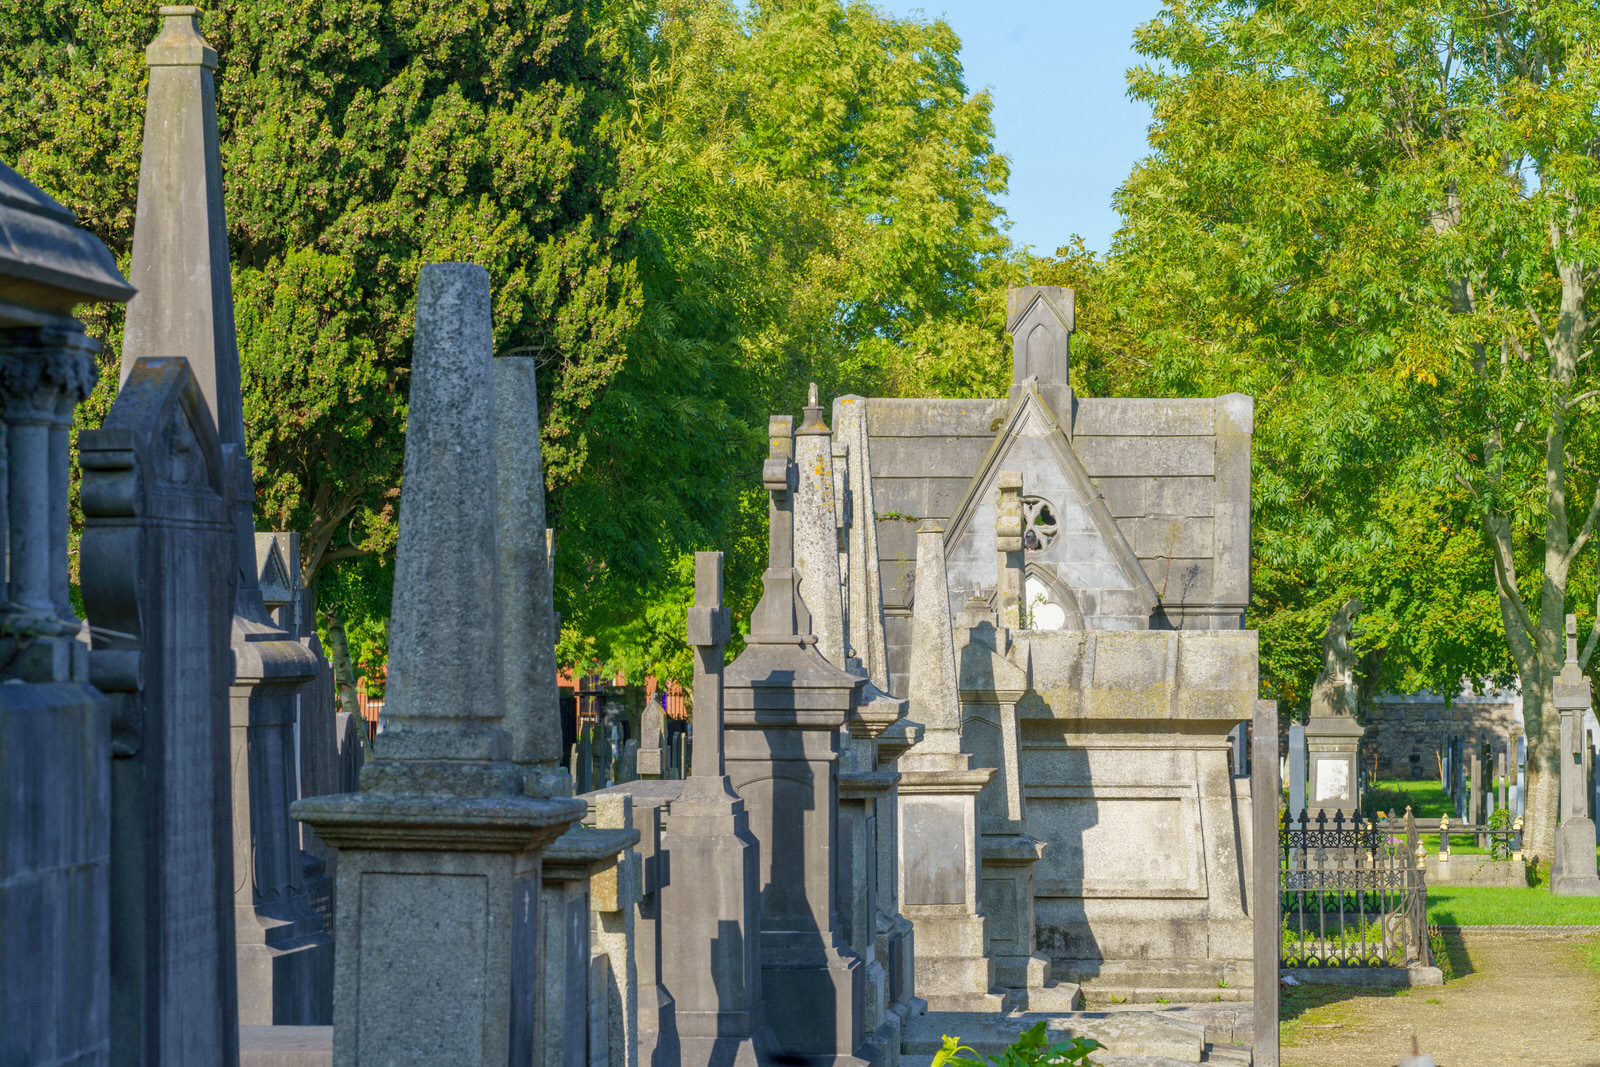 THE OLDER SECTION OF GLASNEVIN CEMETERY [I USED A SONY 70-200MM GM LENS] 008